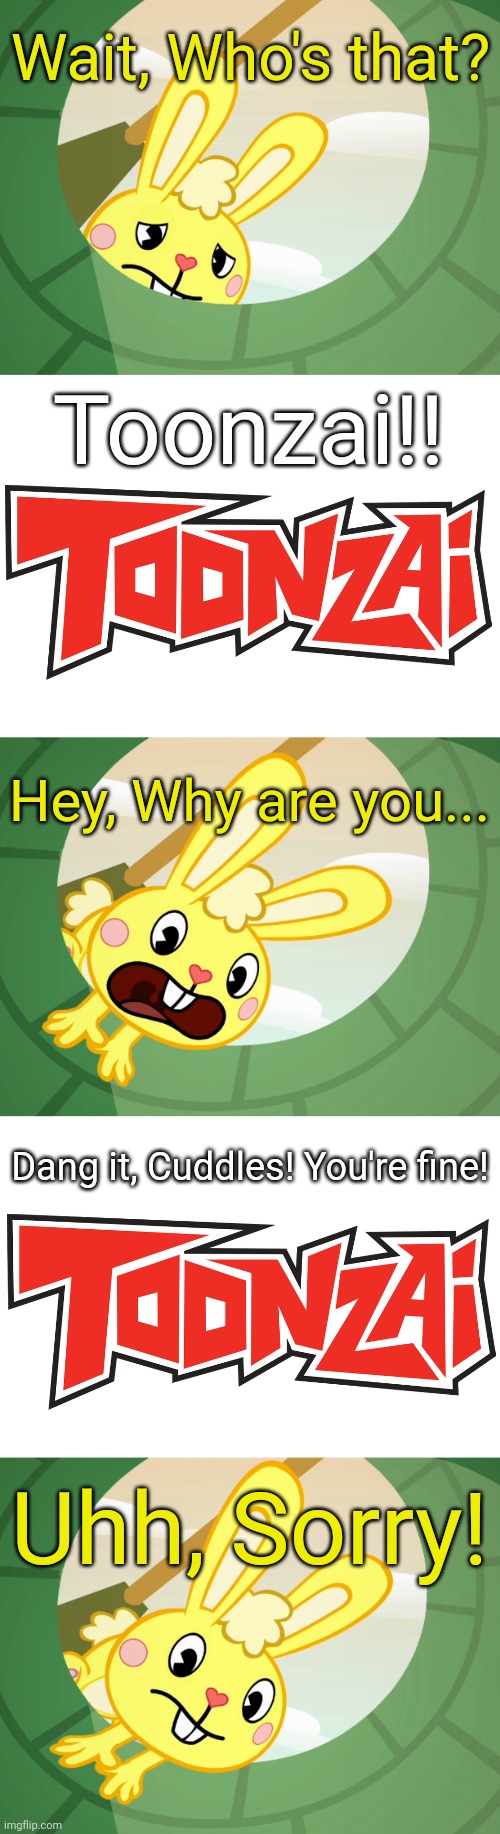 Cuddles Saw Underground (HTF) | Wait, Who's that? Toonzai!! Hey, Why are you... Dang it, Cuddles! You're fine! Uhh, Sorry! | image tagged in cuddles saw underground htf,toonzai logo,happy tree friends,cuddles | made w/ Imgflip meme maker